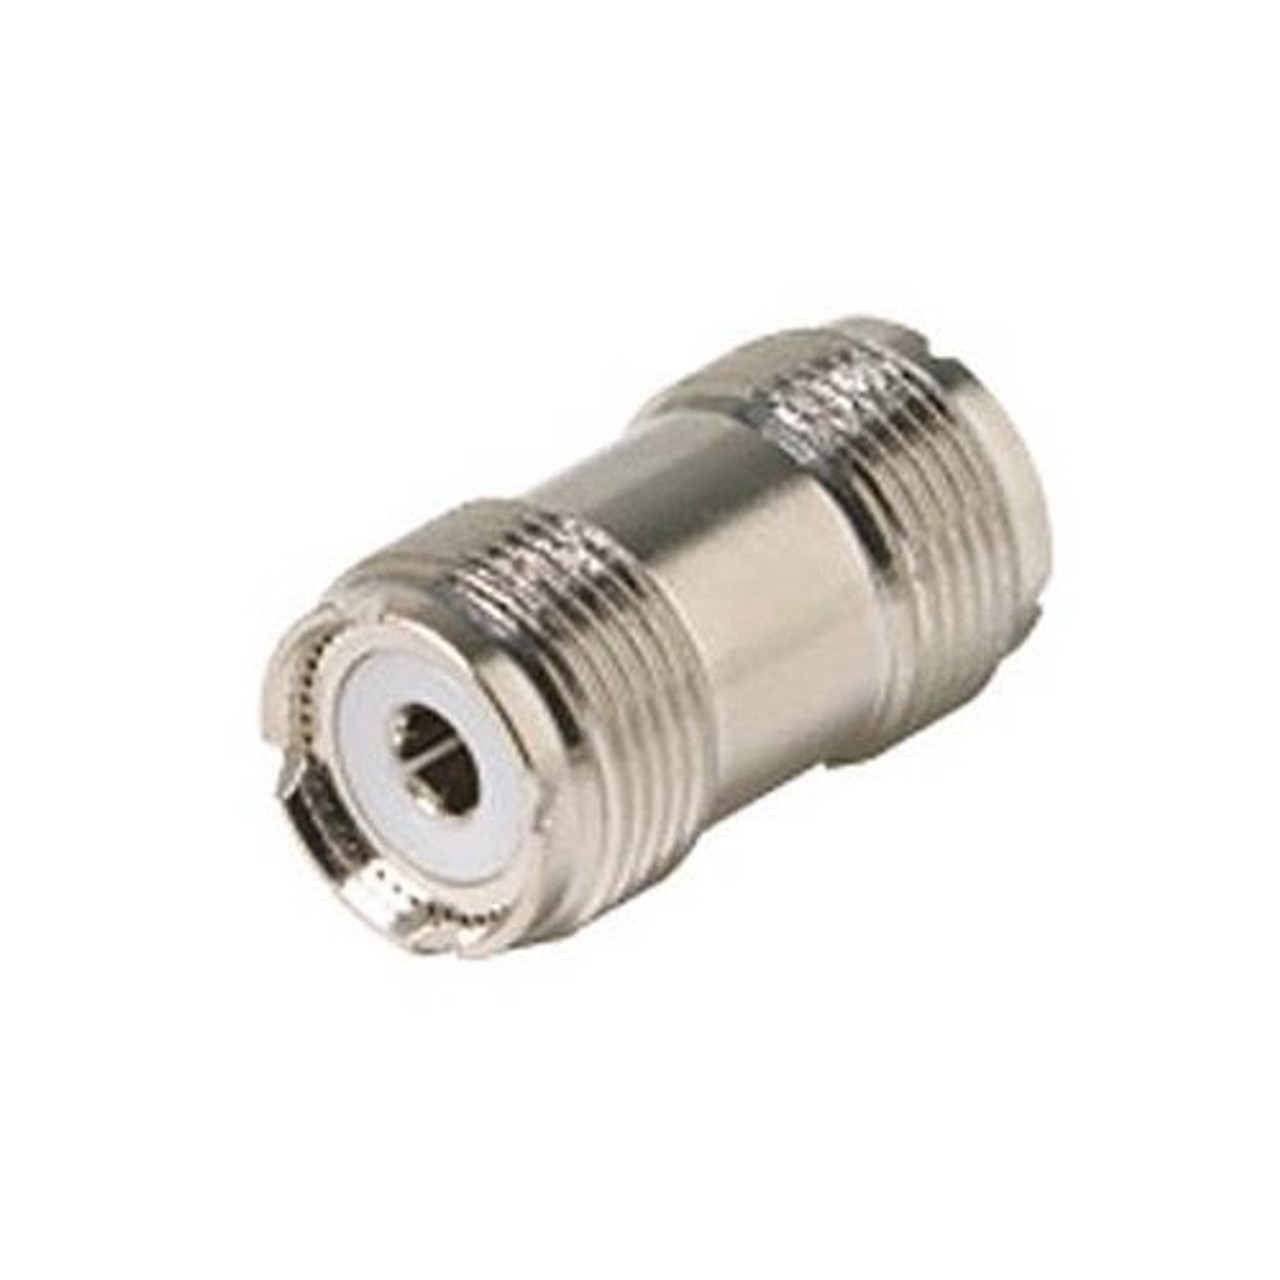 Eagle UHF Coupler Female to Female Inline Adapter Coaxial Connector Double UHF Female In-Line Jack to Jack Commercial Grade Nickel Plated with Delrin Insulator TV Antenna Satellite Components Plug